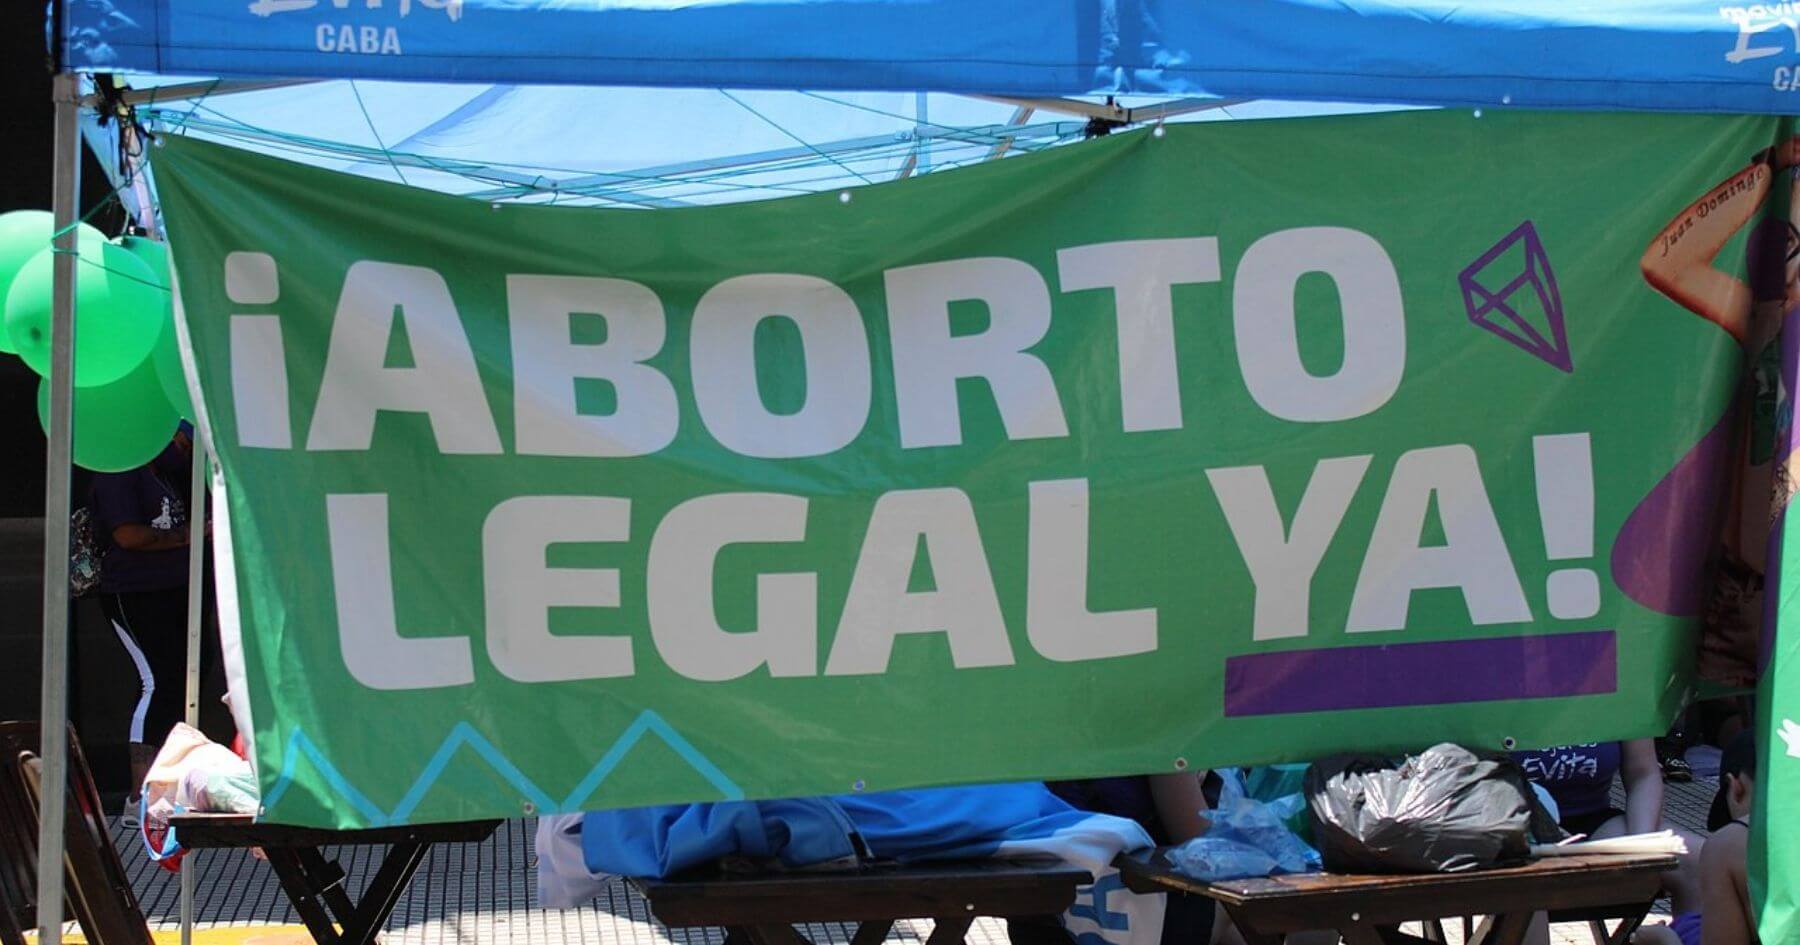 Abortion campaigner dies after getting legal abortion in Argentina